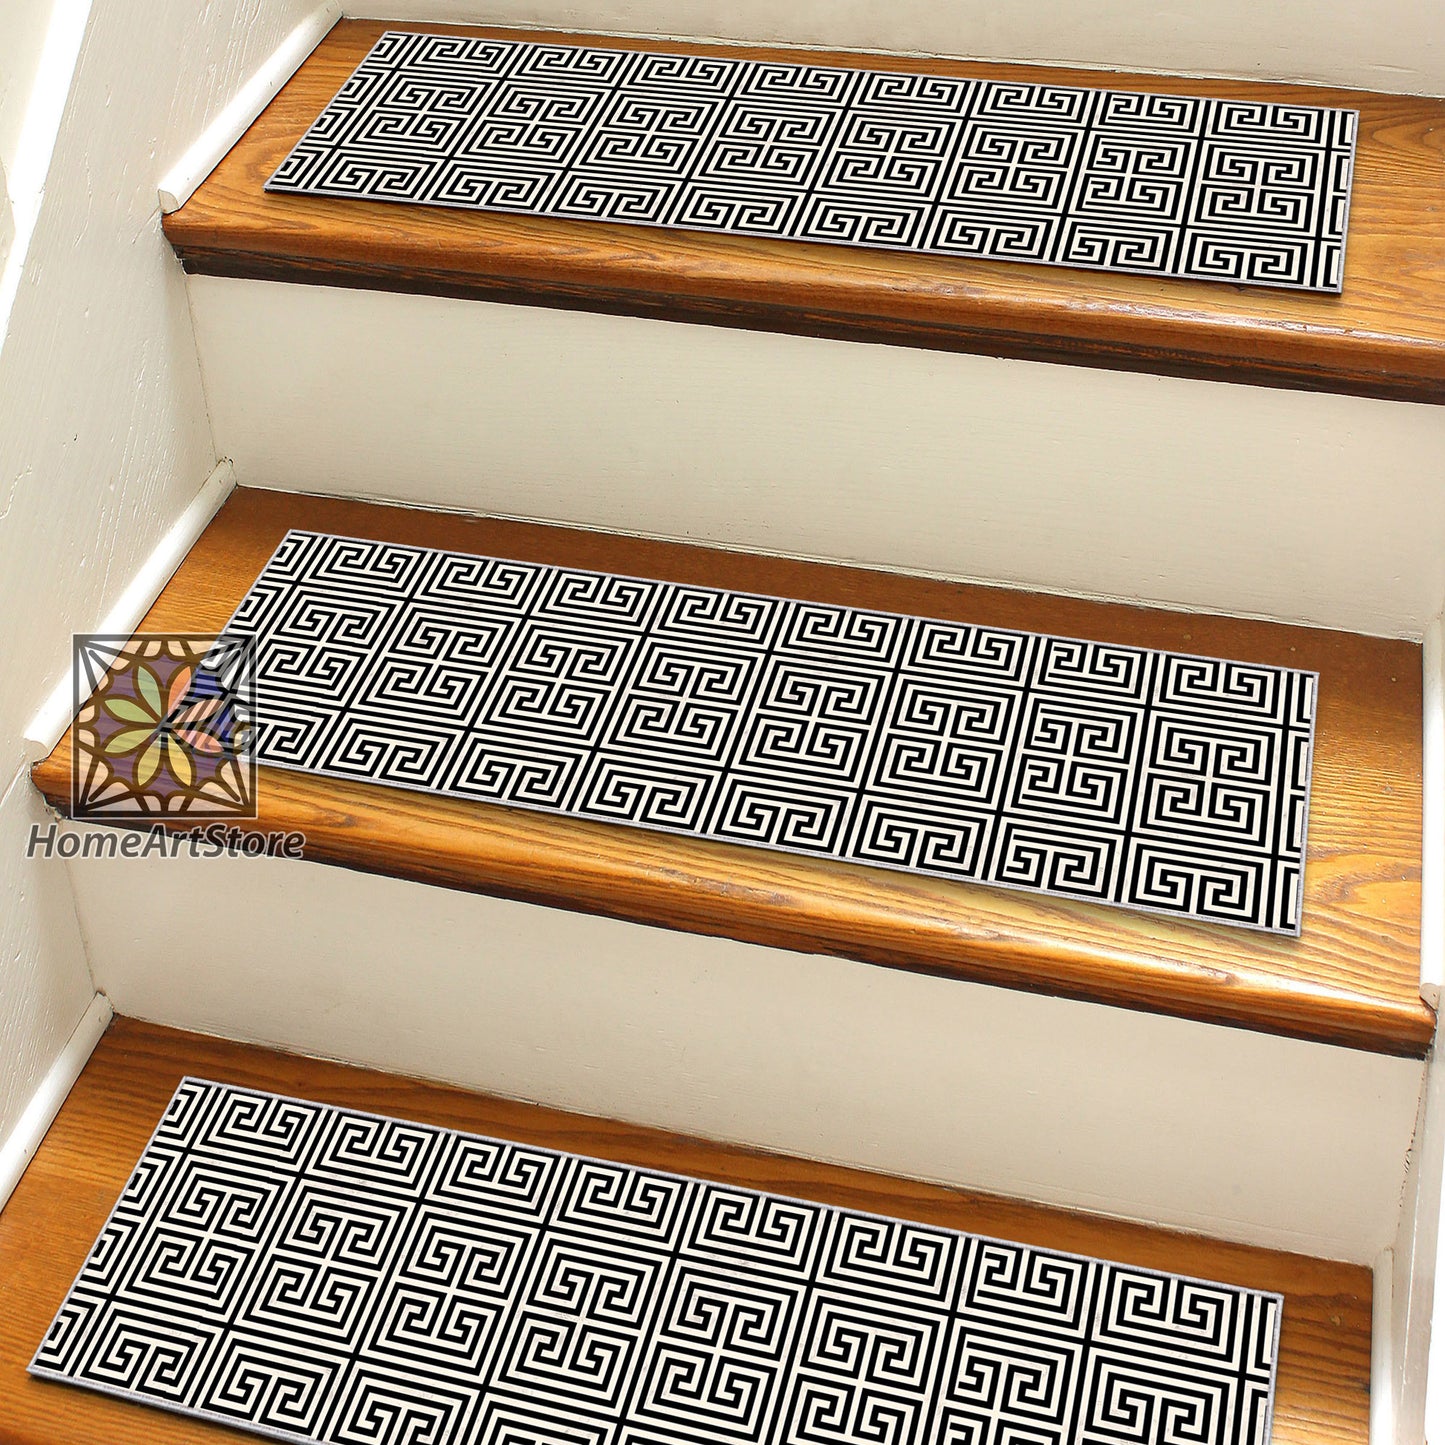 Illusion Pattern Stair Treads Rugs, Black and White Geometric Step Stair Mats, Non-Slip Stair Rugs, Modern Stair Carpet